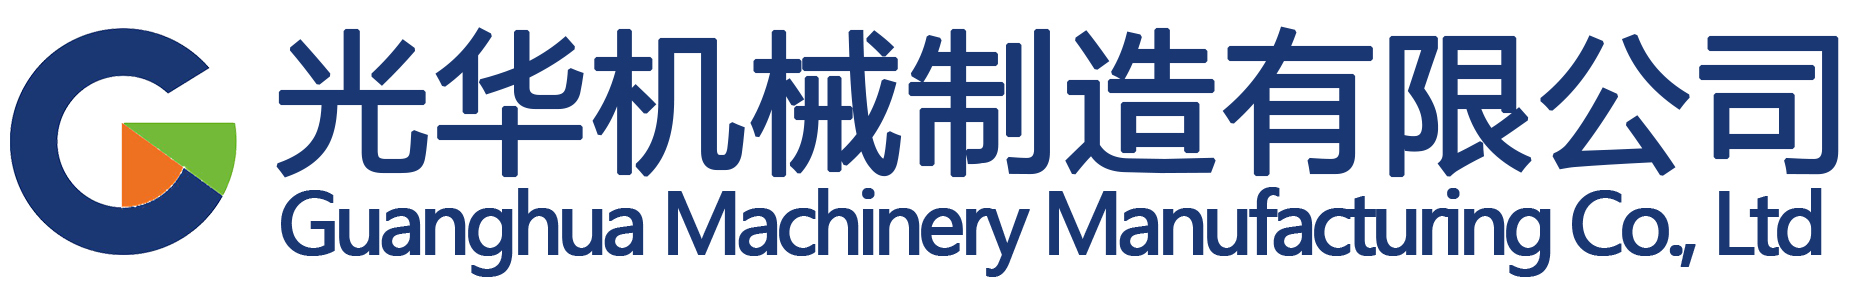 High end equipment manufacturing and comprehensive services-case-Guanghua Machinery Intelligent Portal Website